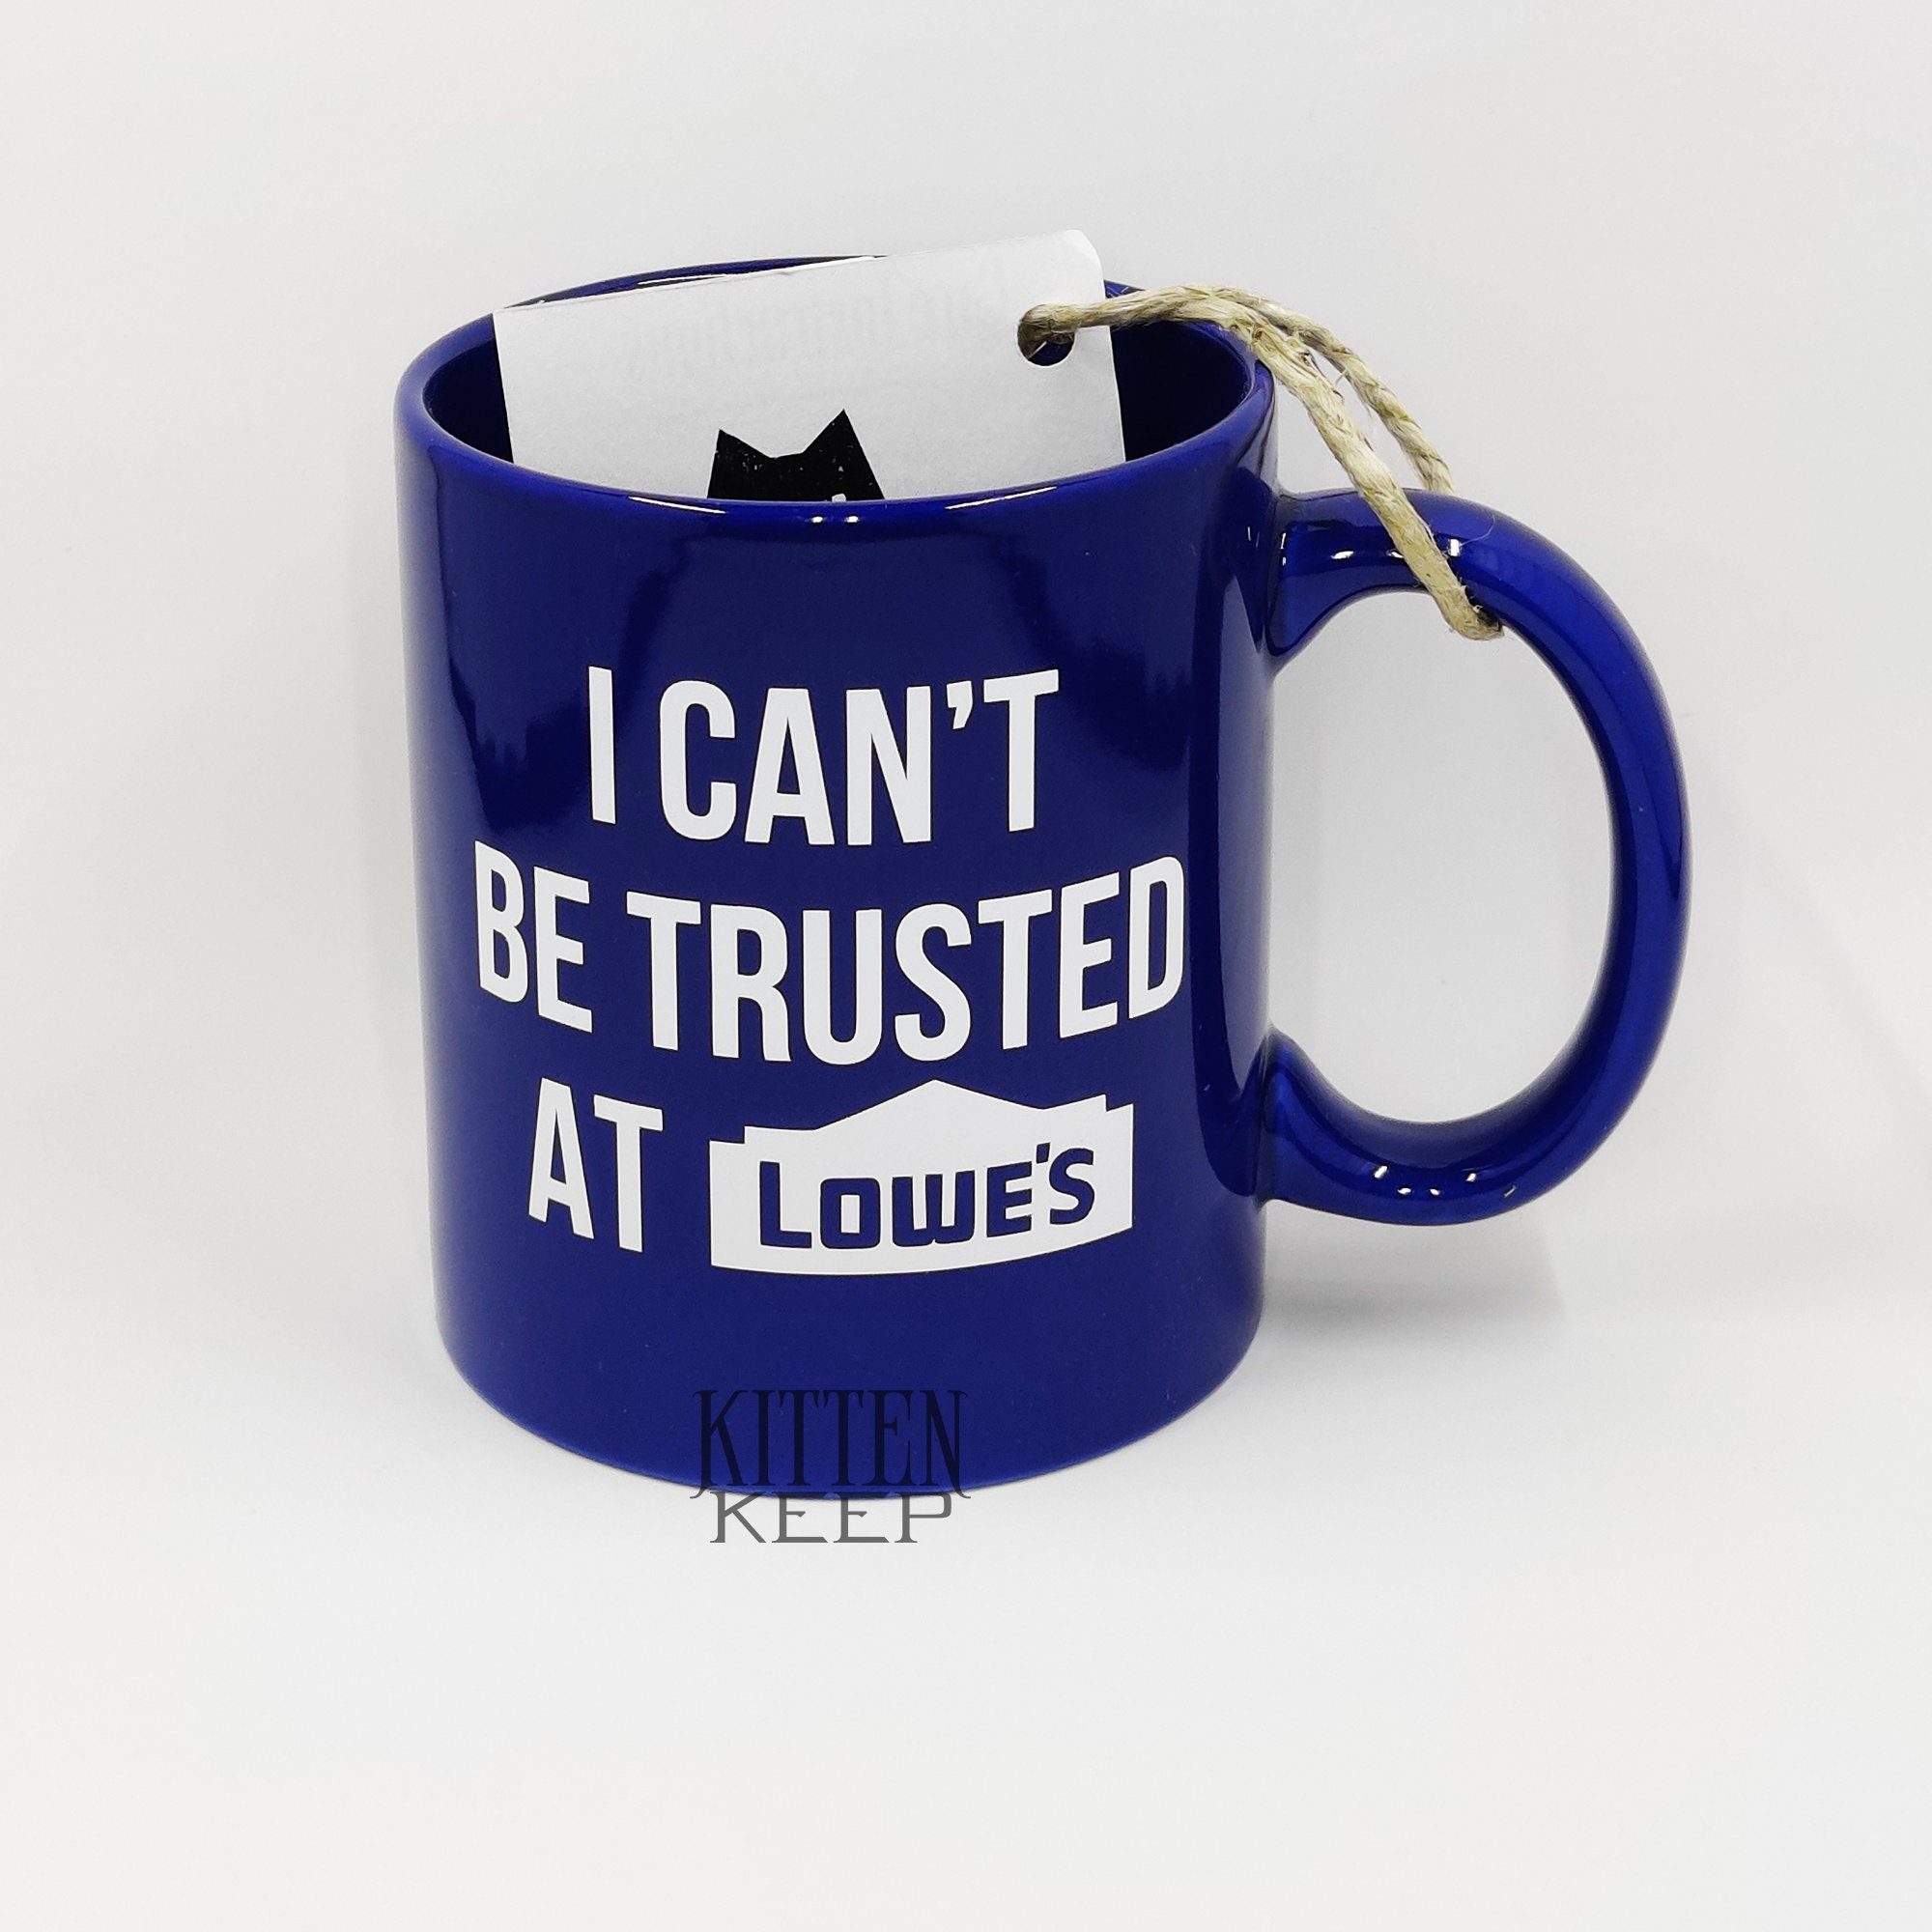 I Can’t Be Trusted At (Home Improvement Store) Coffee Mug